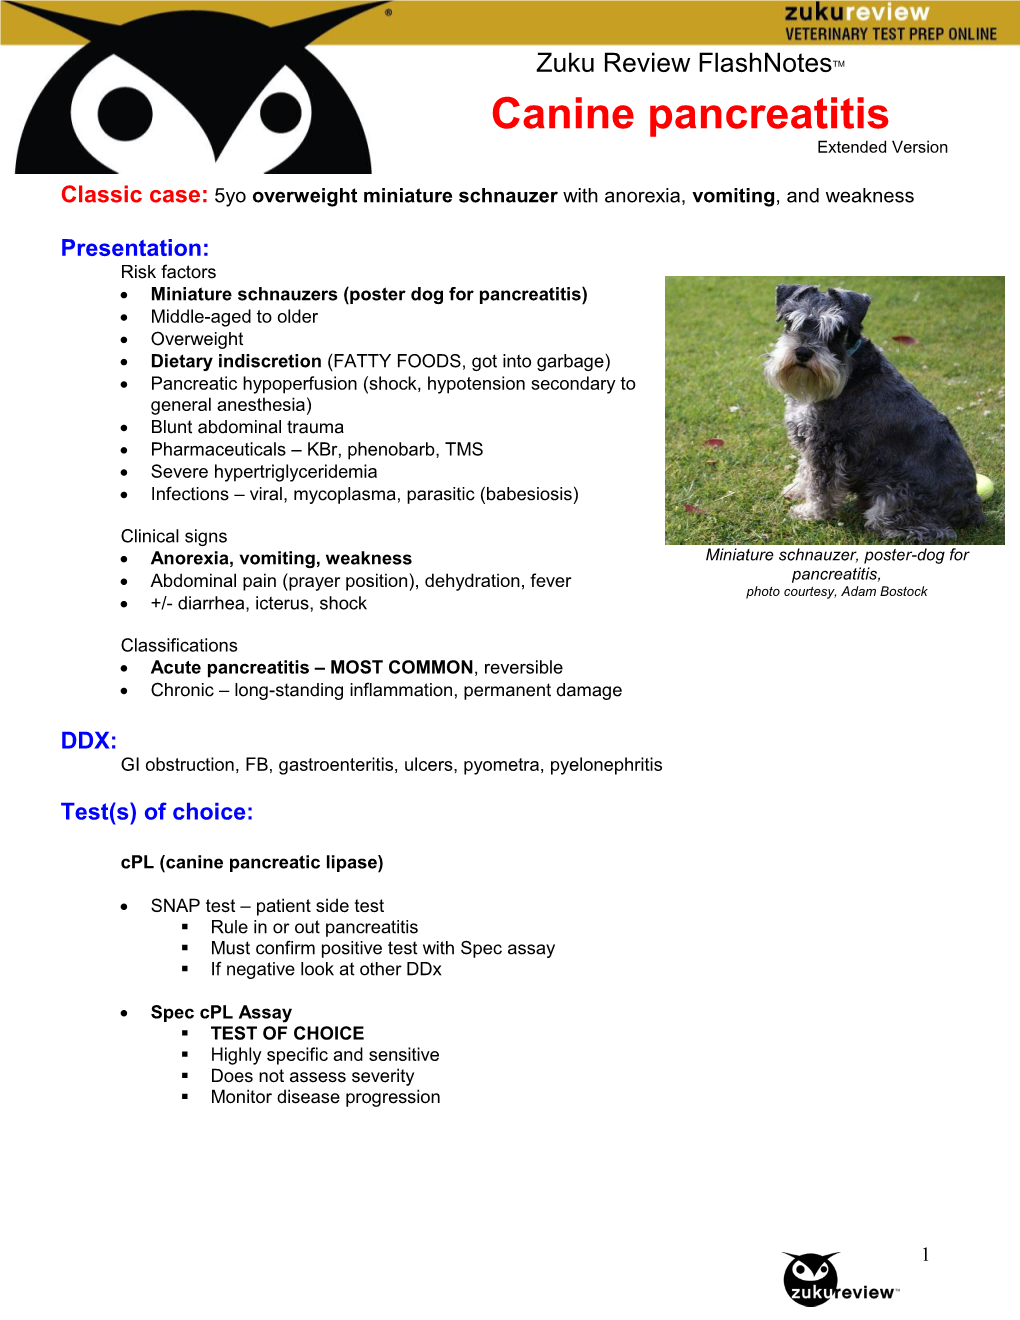 Canine Pancreatitis Extended Version